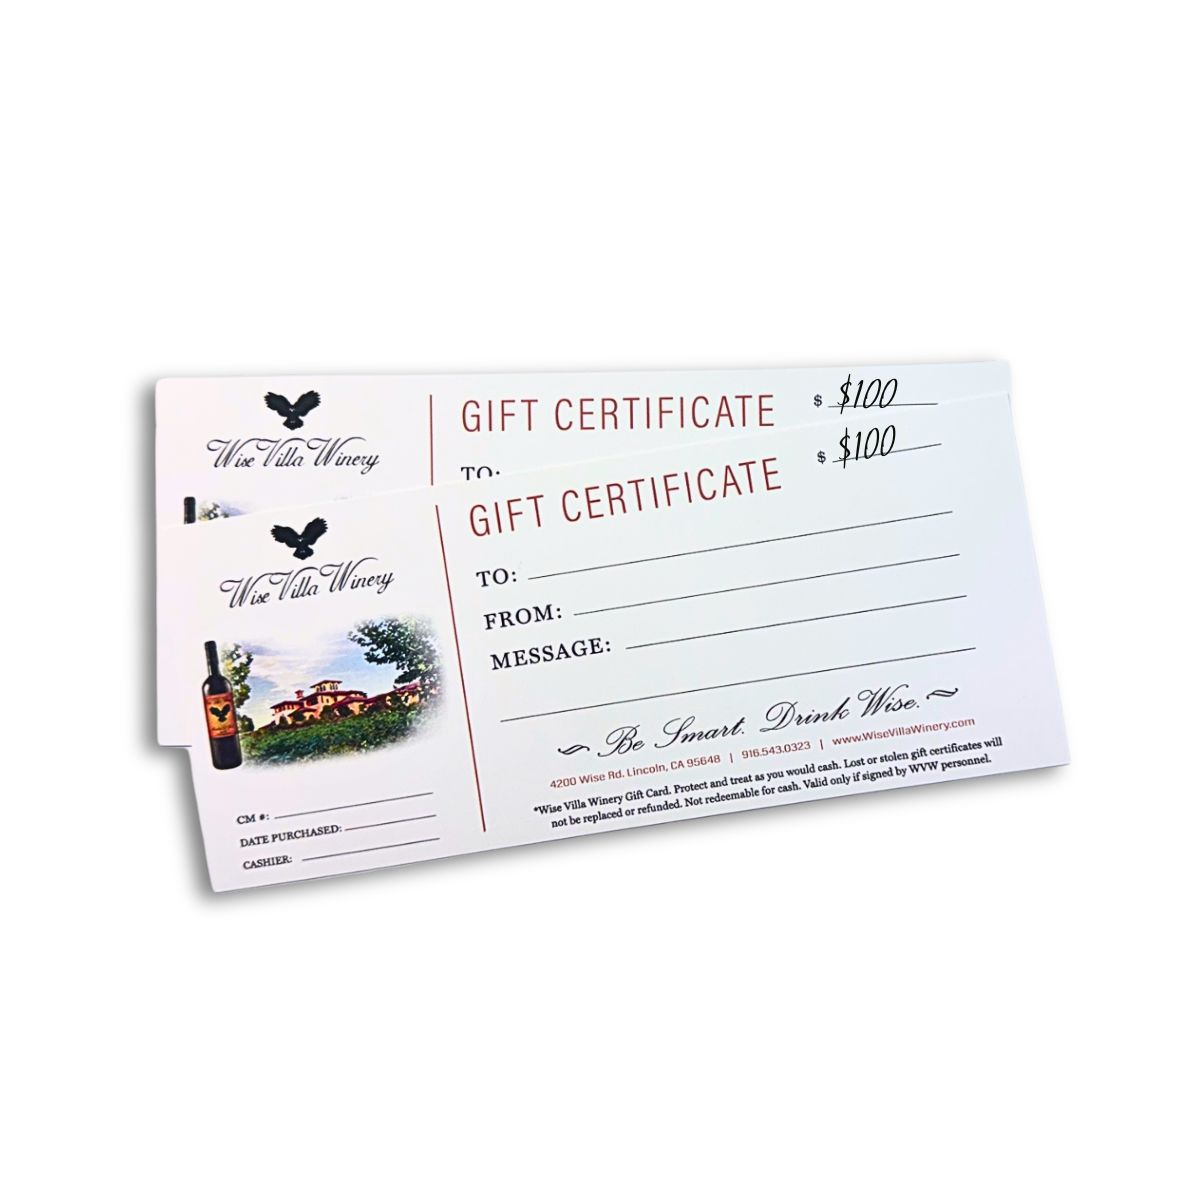 Product Image for $100 Gift Certificate 